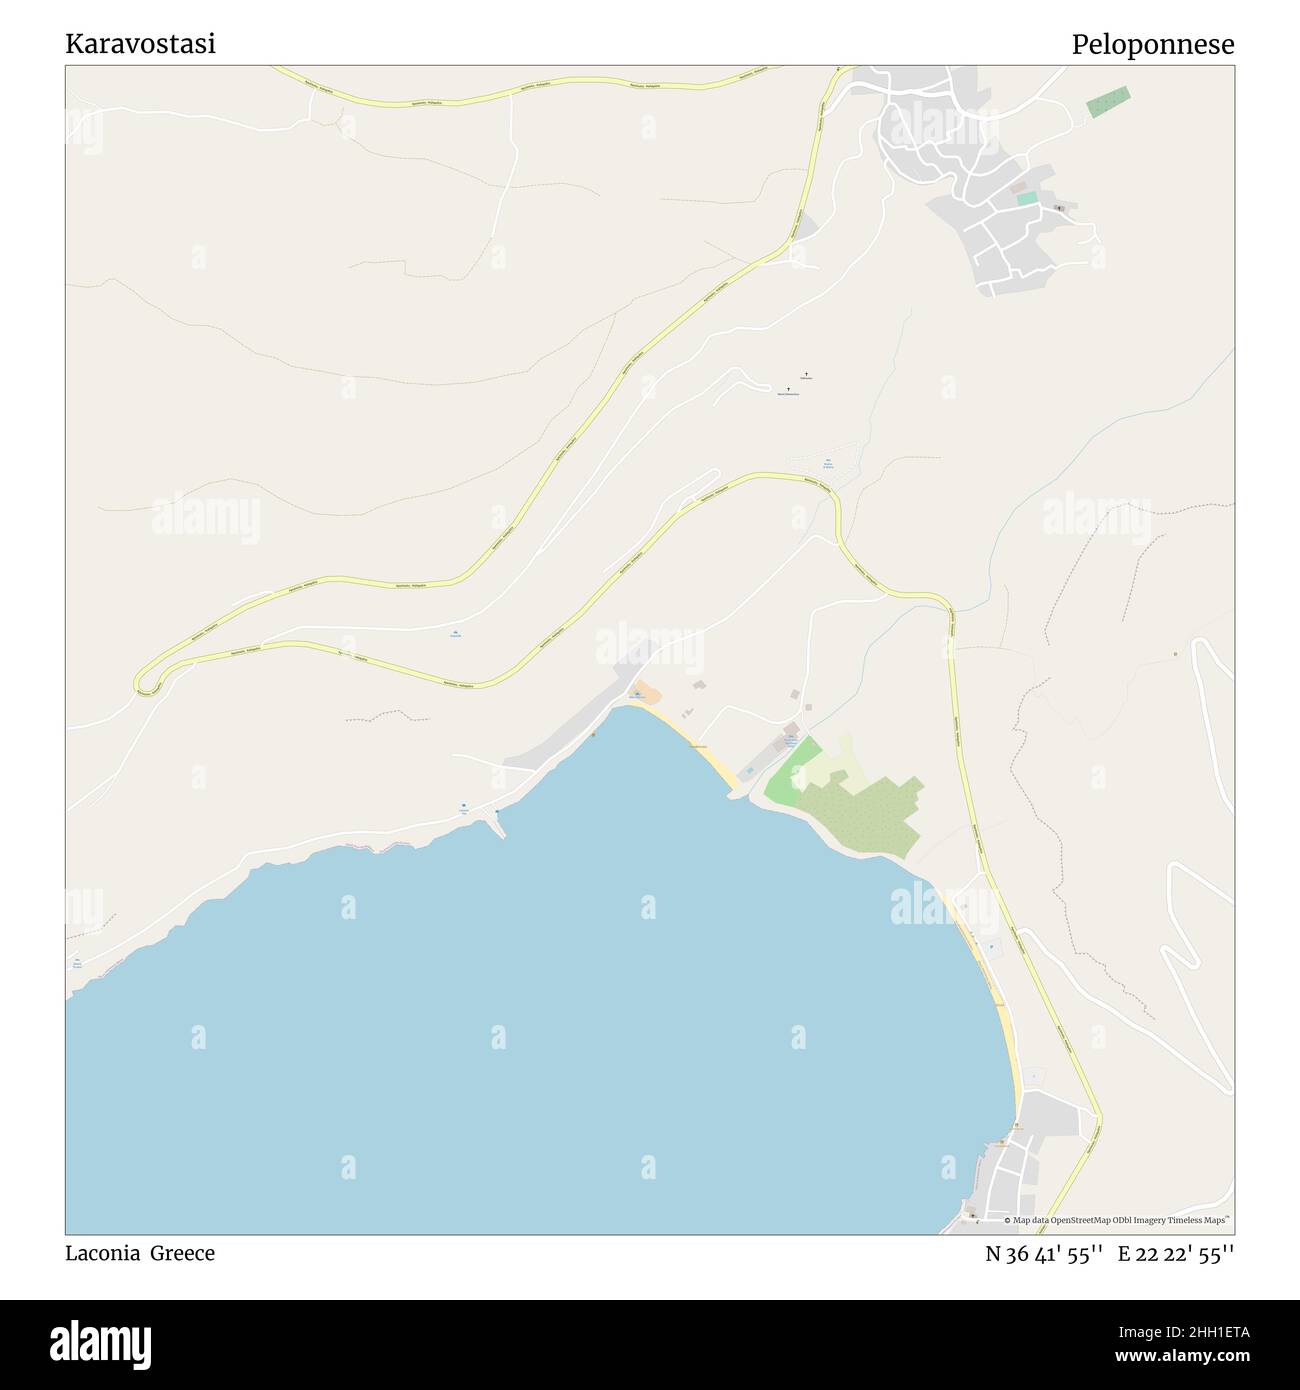 Karavostasi, Laconia, Greece, Peloponnese, N 36 41' 55'', E 22 22' 55'', map, Timeless Map published in 2021. Travelers, explorers and adventurers like Florence Nightingale, David Livingstone, Ernest Shackleton, Lewis and Clark and Sherlock Holmes relied on maps to plan travels to the world's most remote corners, Timeless Maps is mapping most locations on the globe, showing the achievement of great dreams Stock Photo